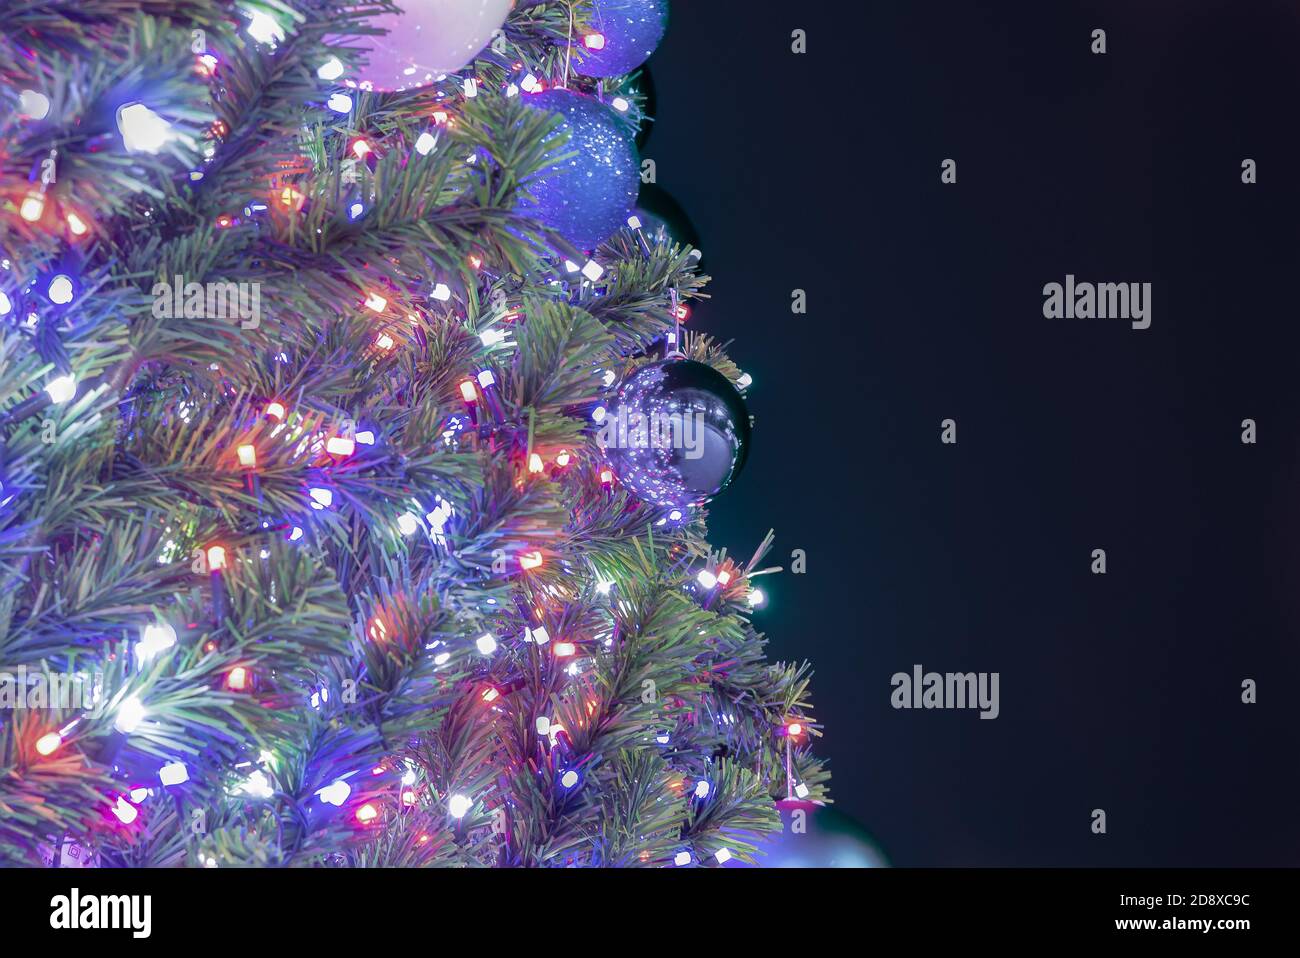 Abstract Blurred Of Blue Lights Background Or Blur Light Of Christmas  Decorations Concept Stock Photo, Picture and Royalty Free Image. Image  70698539.